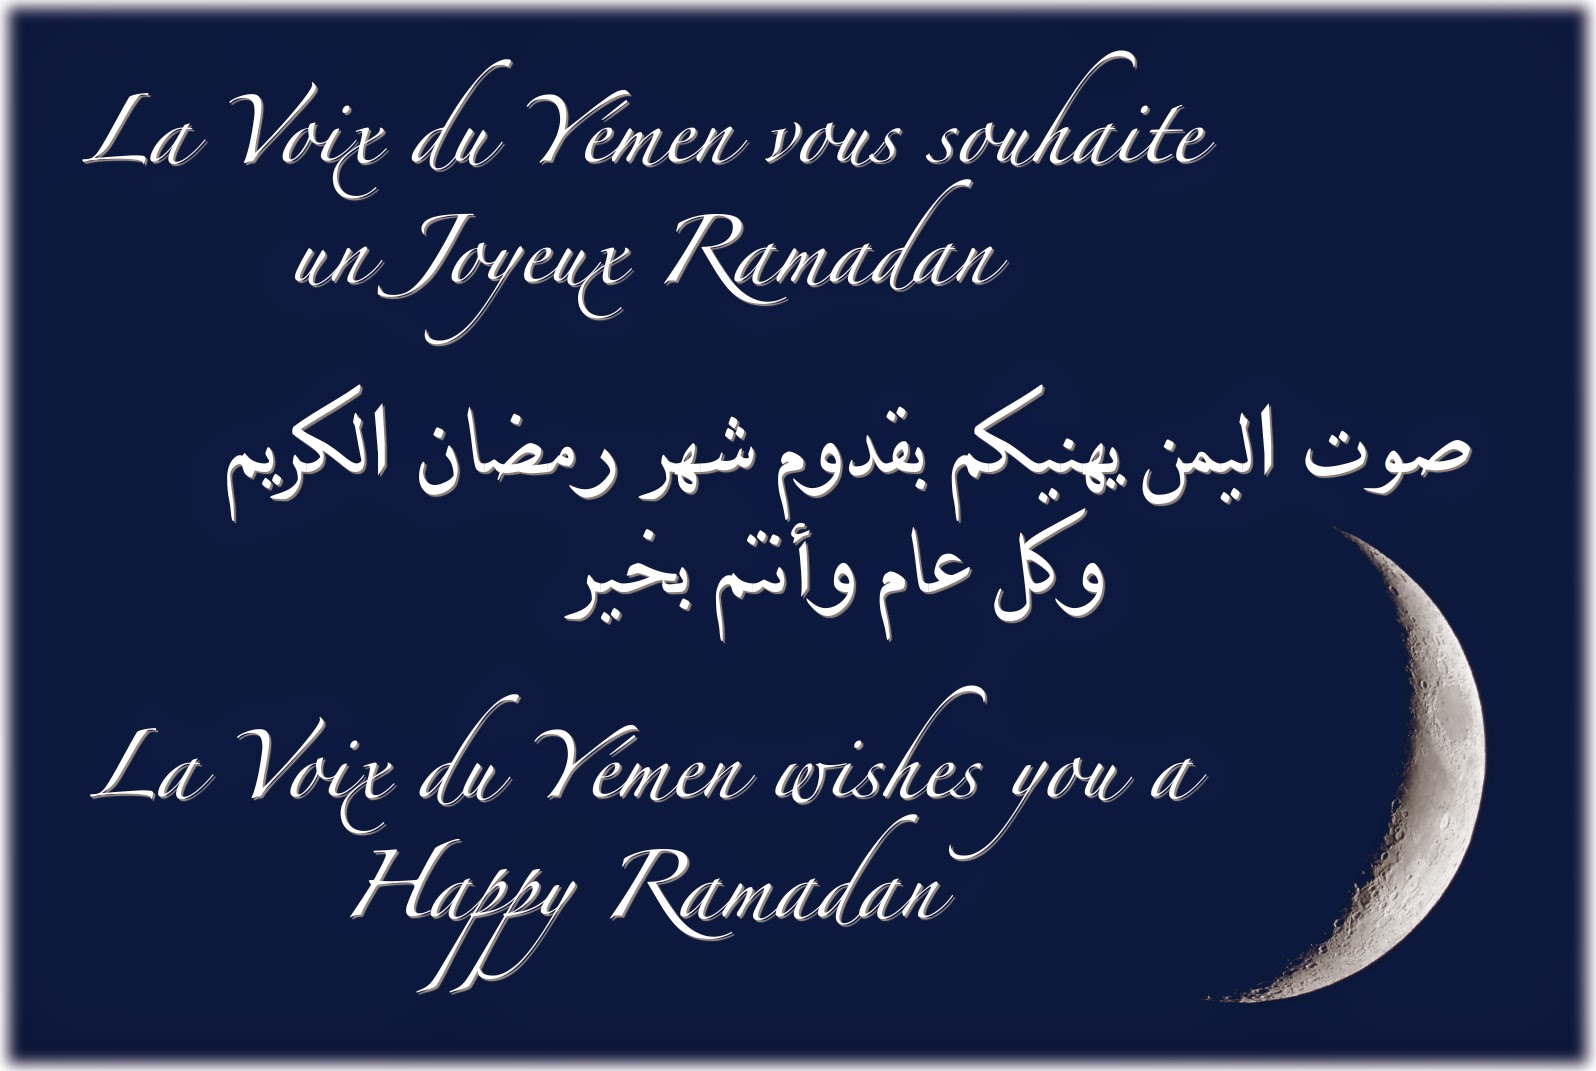 Happy Ramadan Mubarak Messages and Dua in Arabic with Images - Stylish